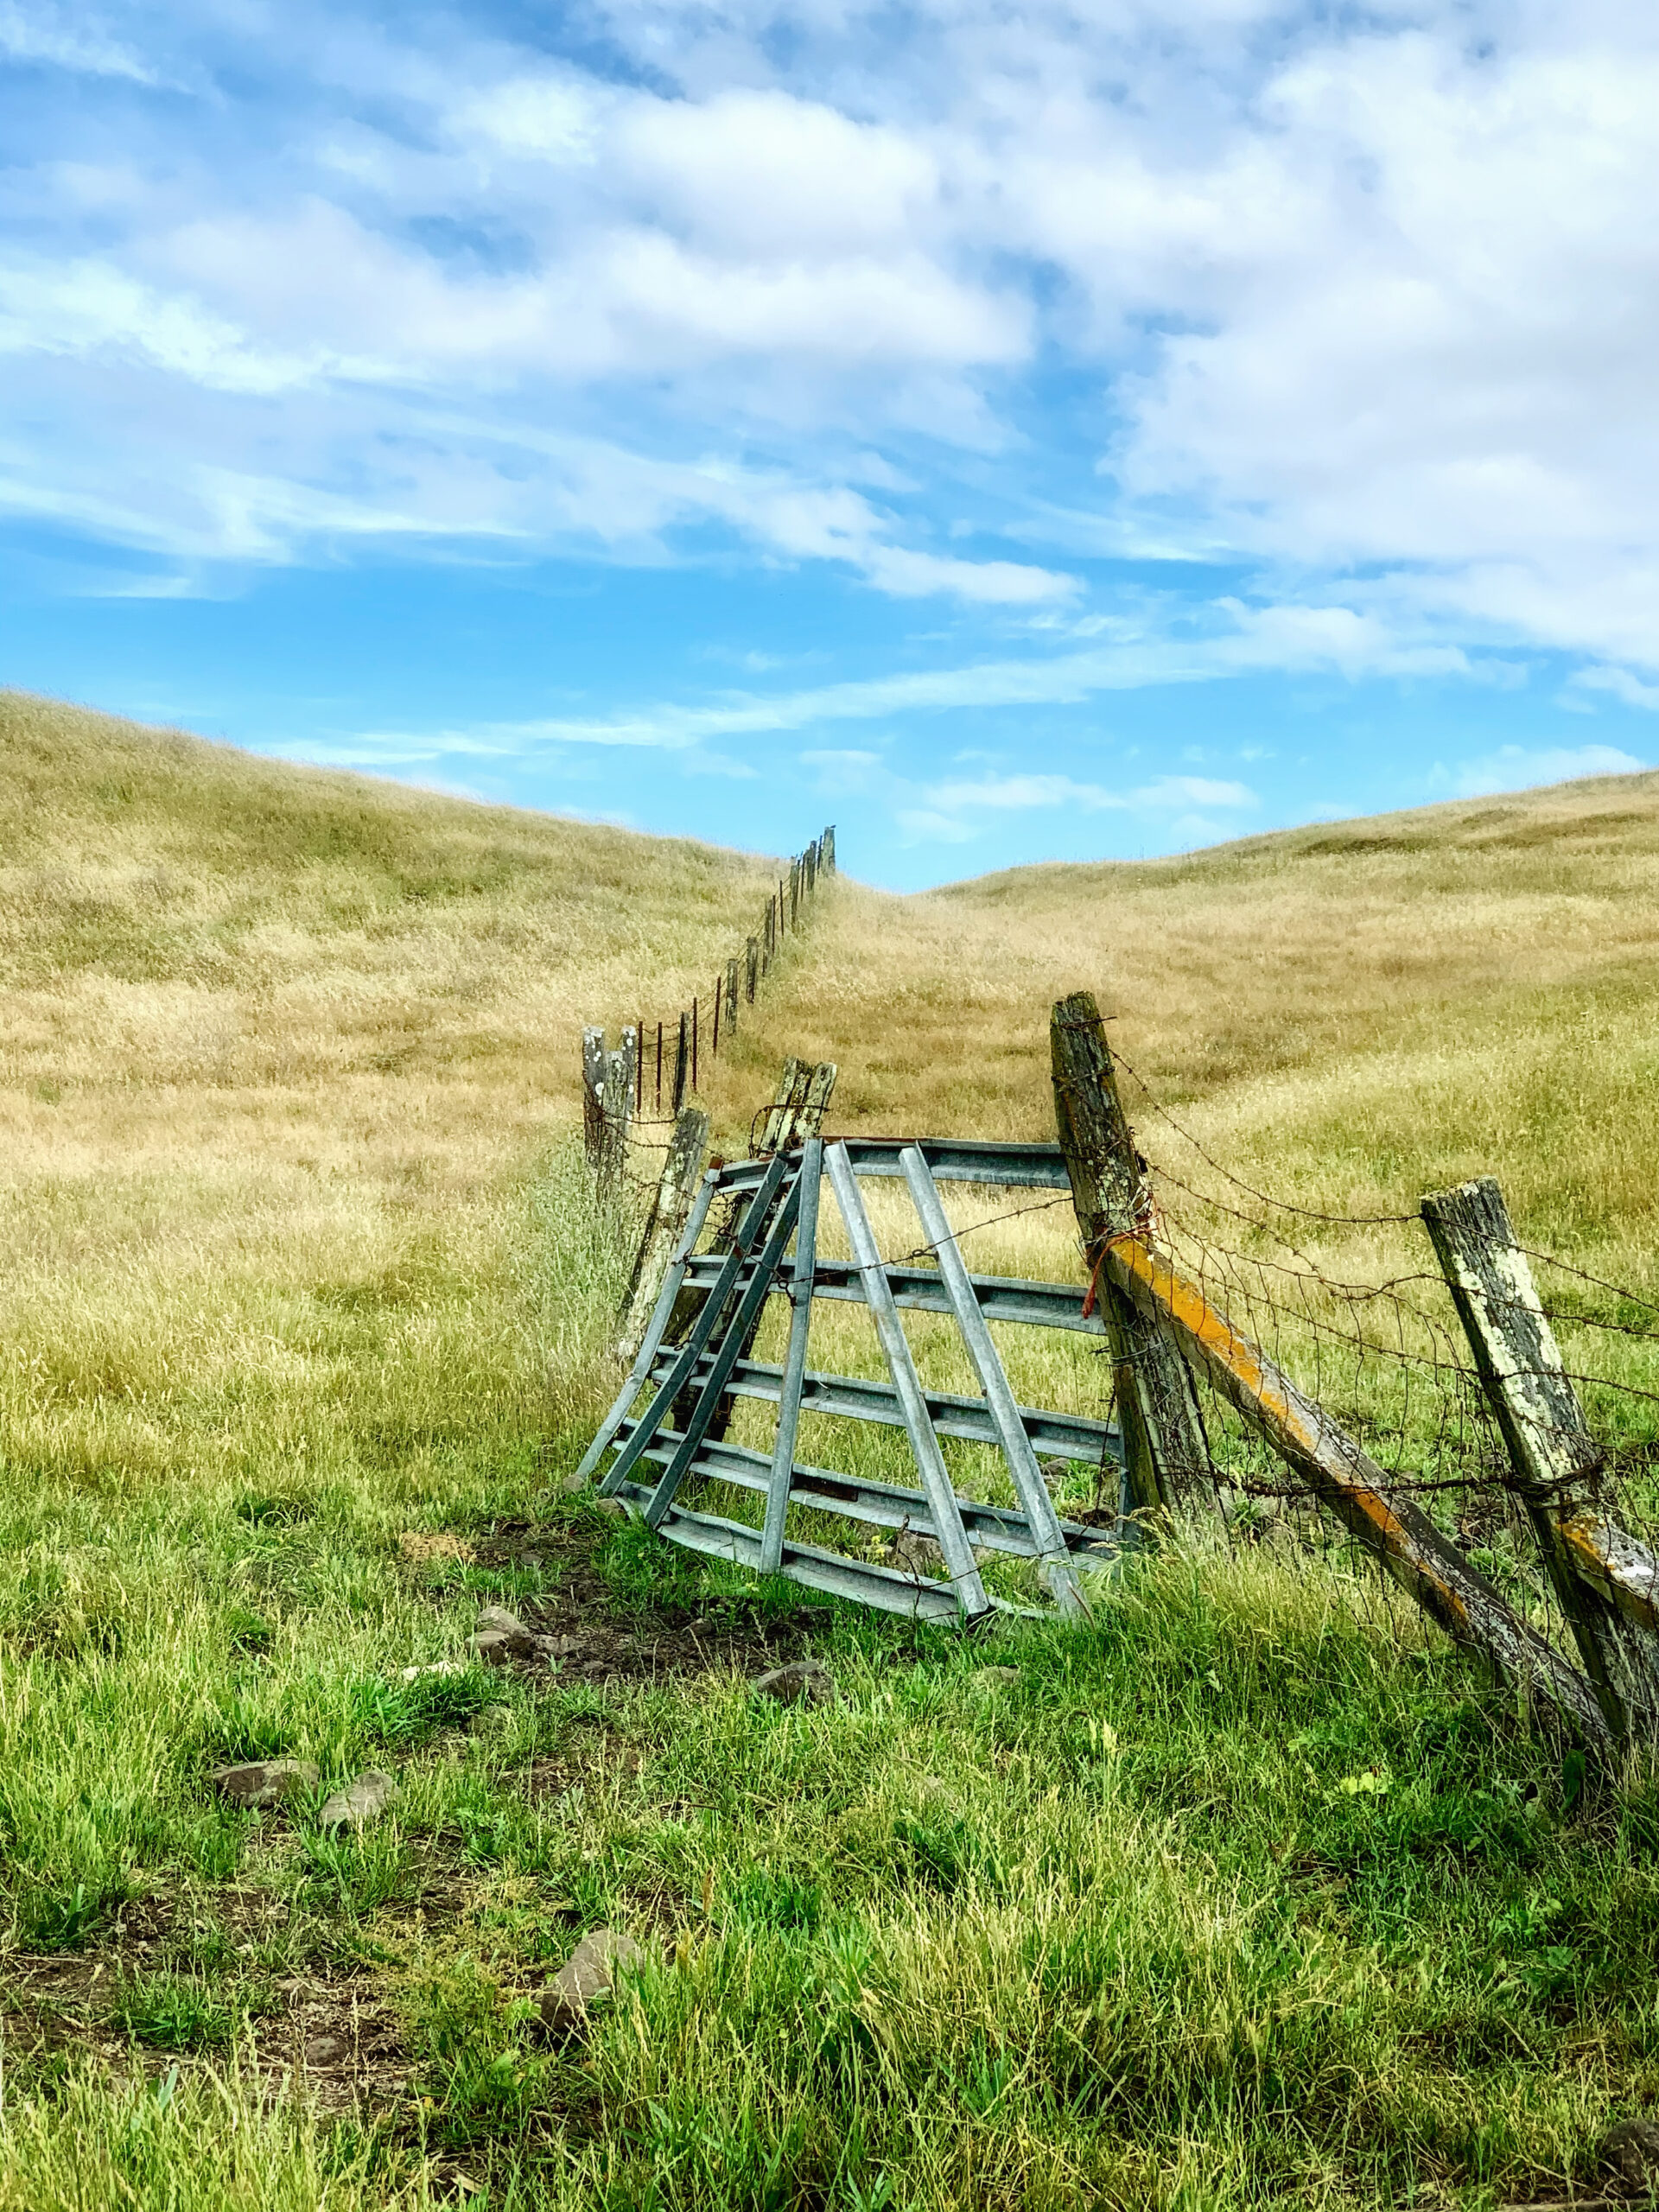 An old wooden fence in a grassy field.